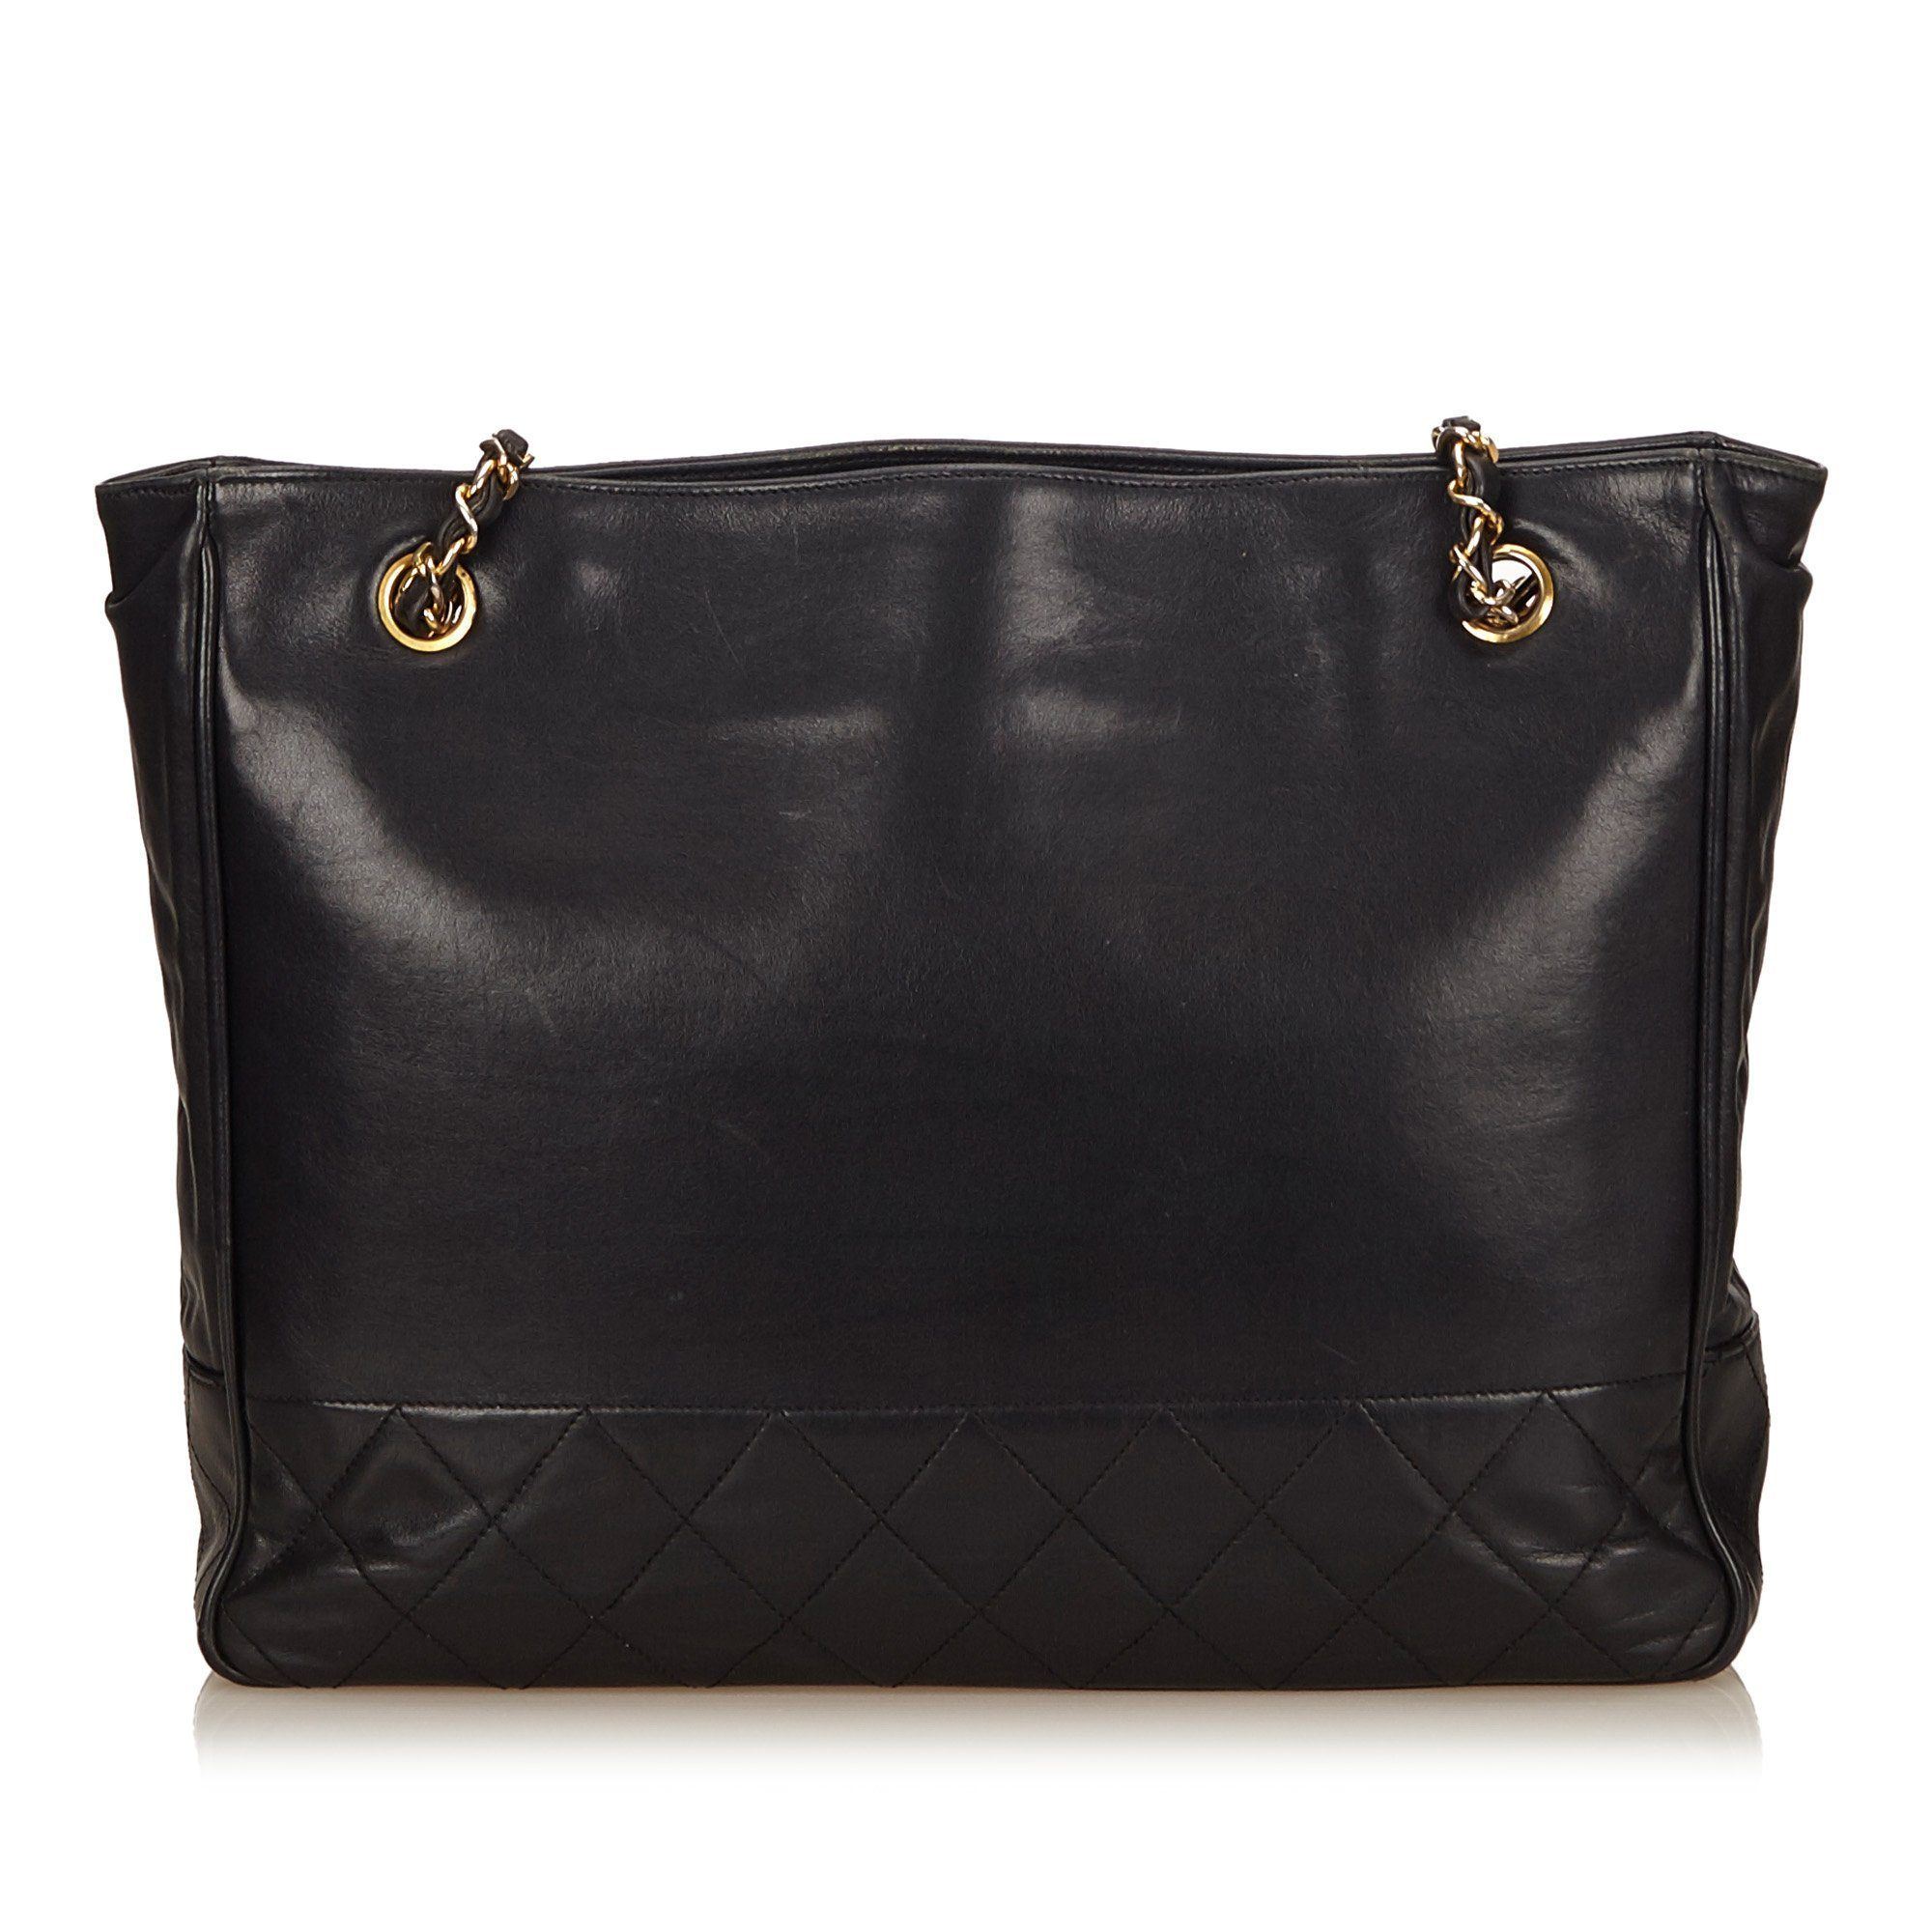 Chanel Quilted Calf Leather Tote Bag – The Vintage Contessa & Times Past